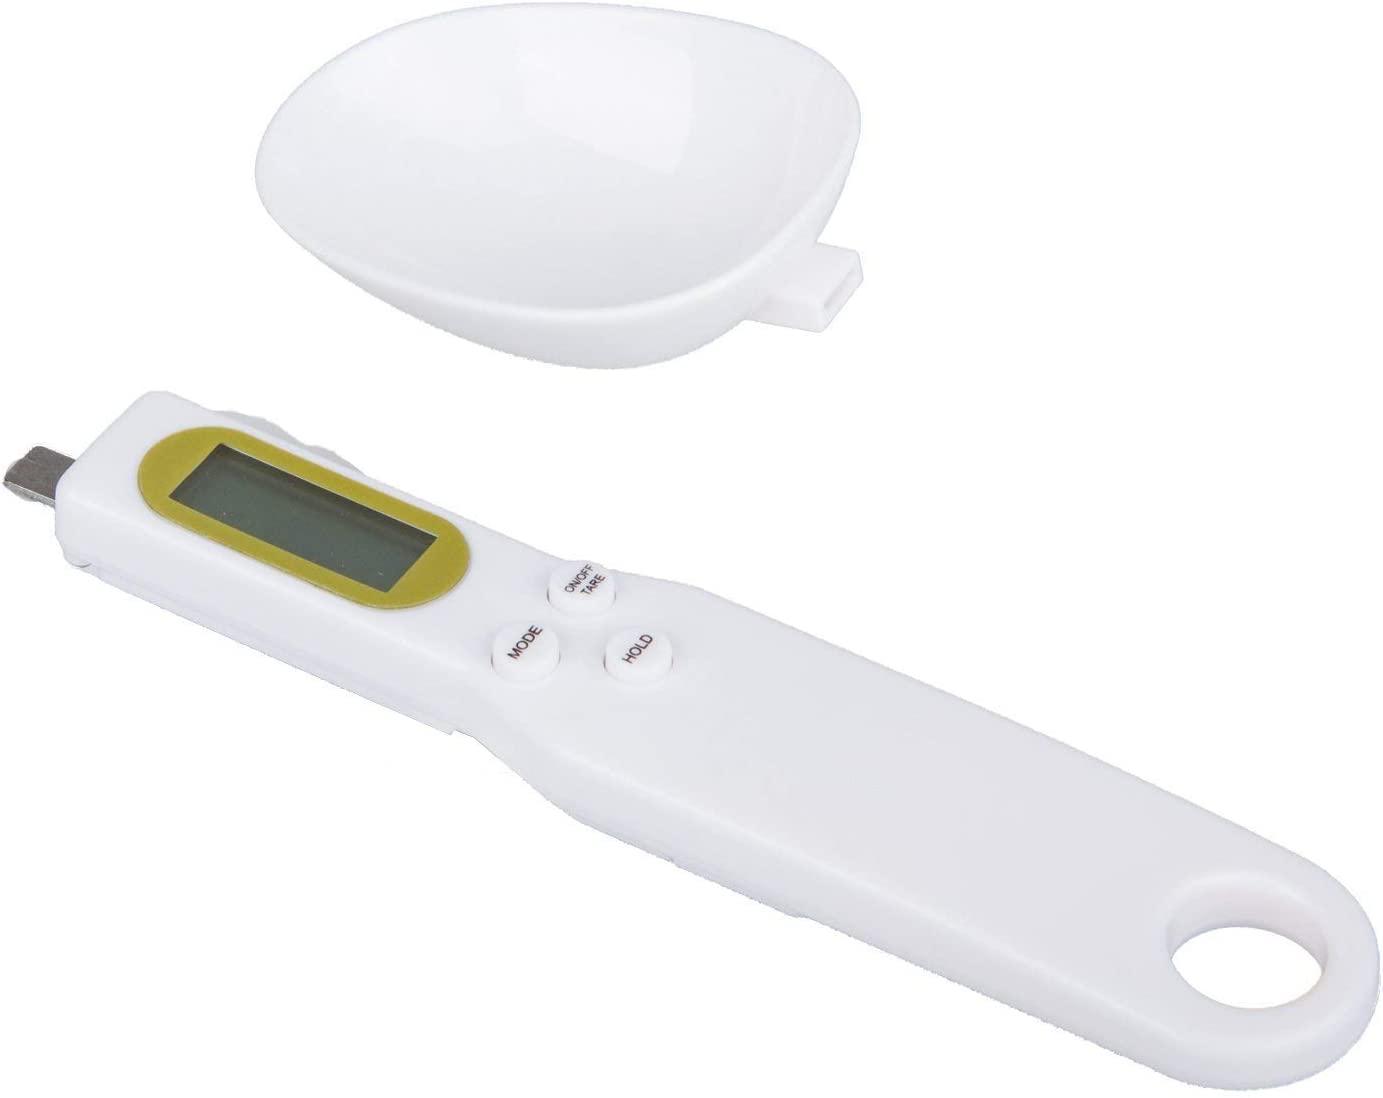 Digital Scale Spoon for Exact Portions